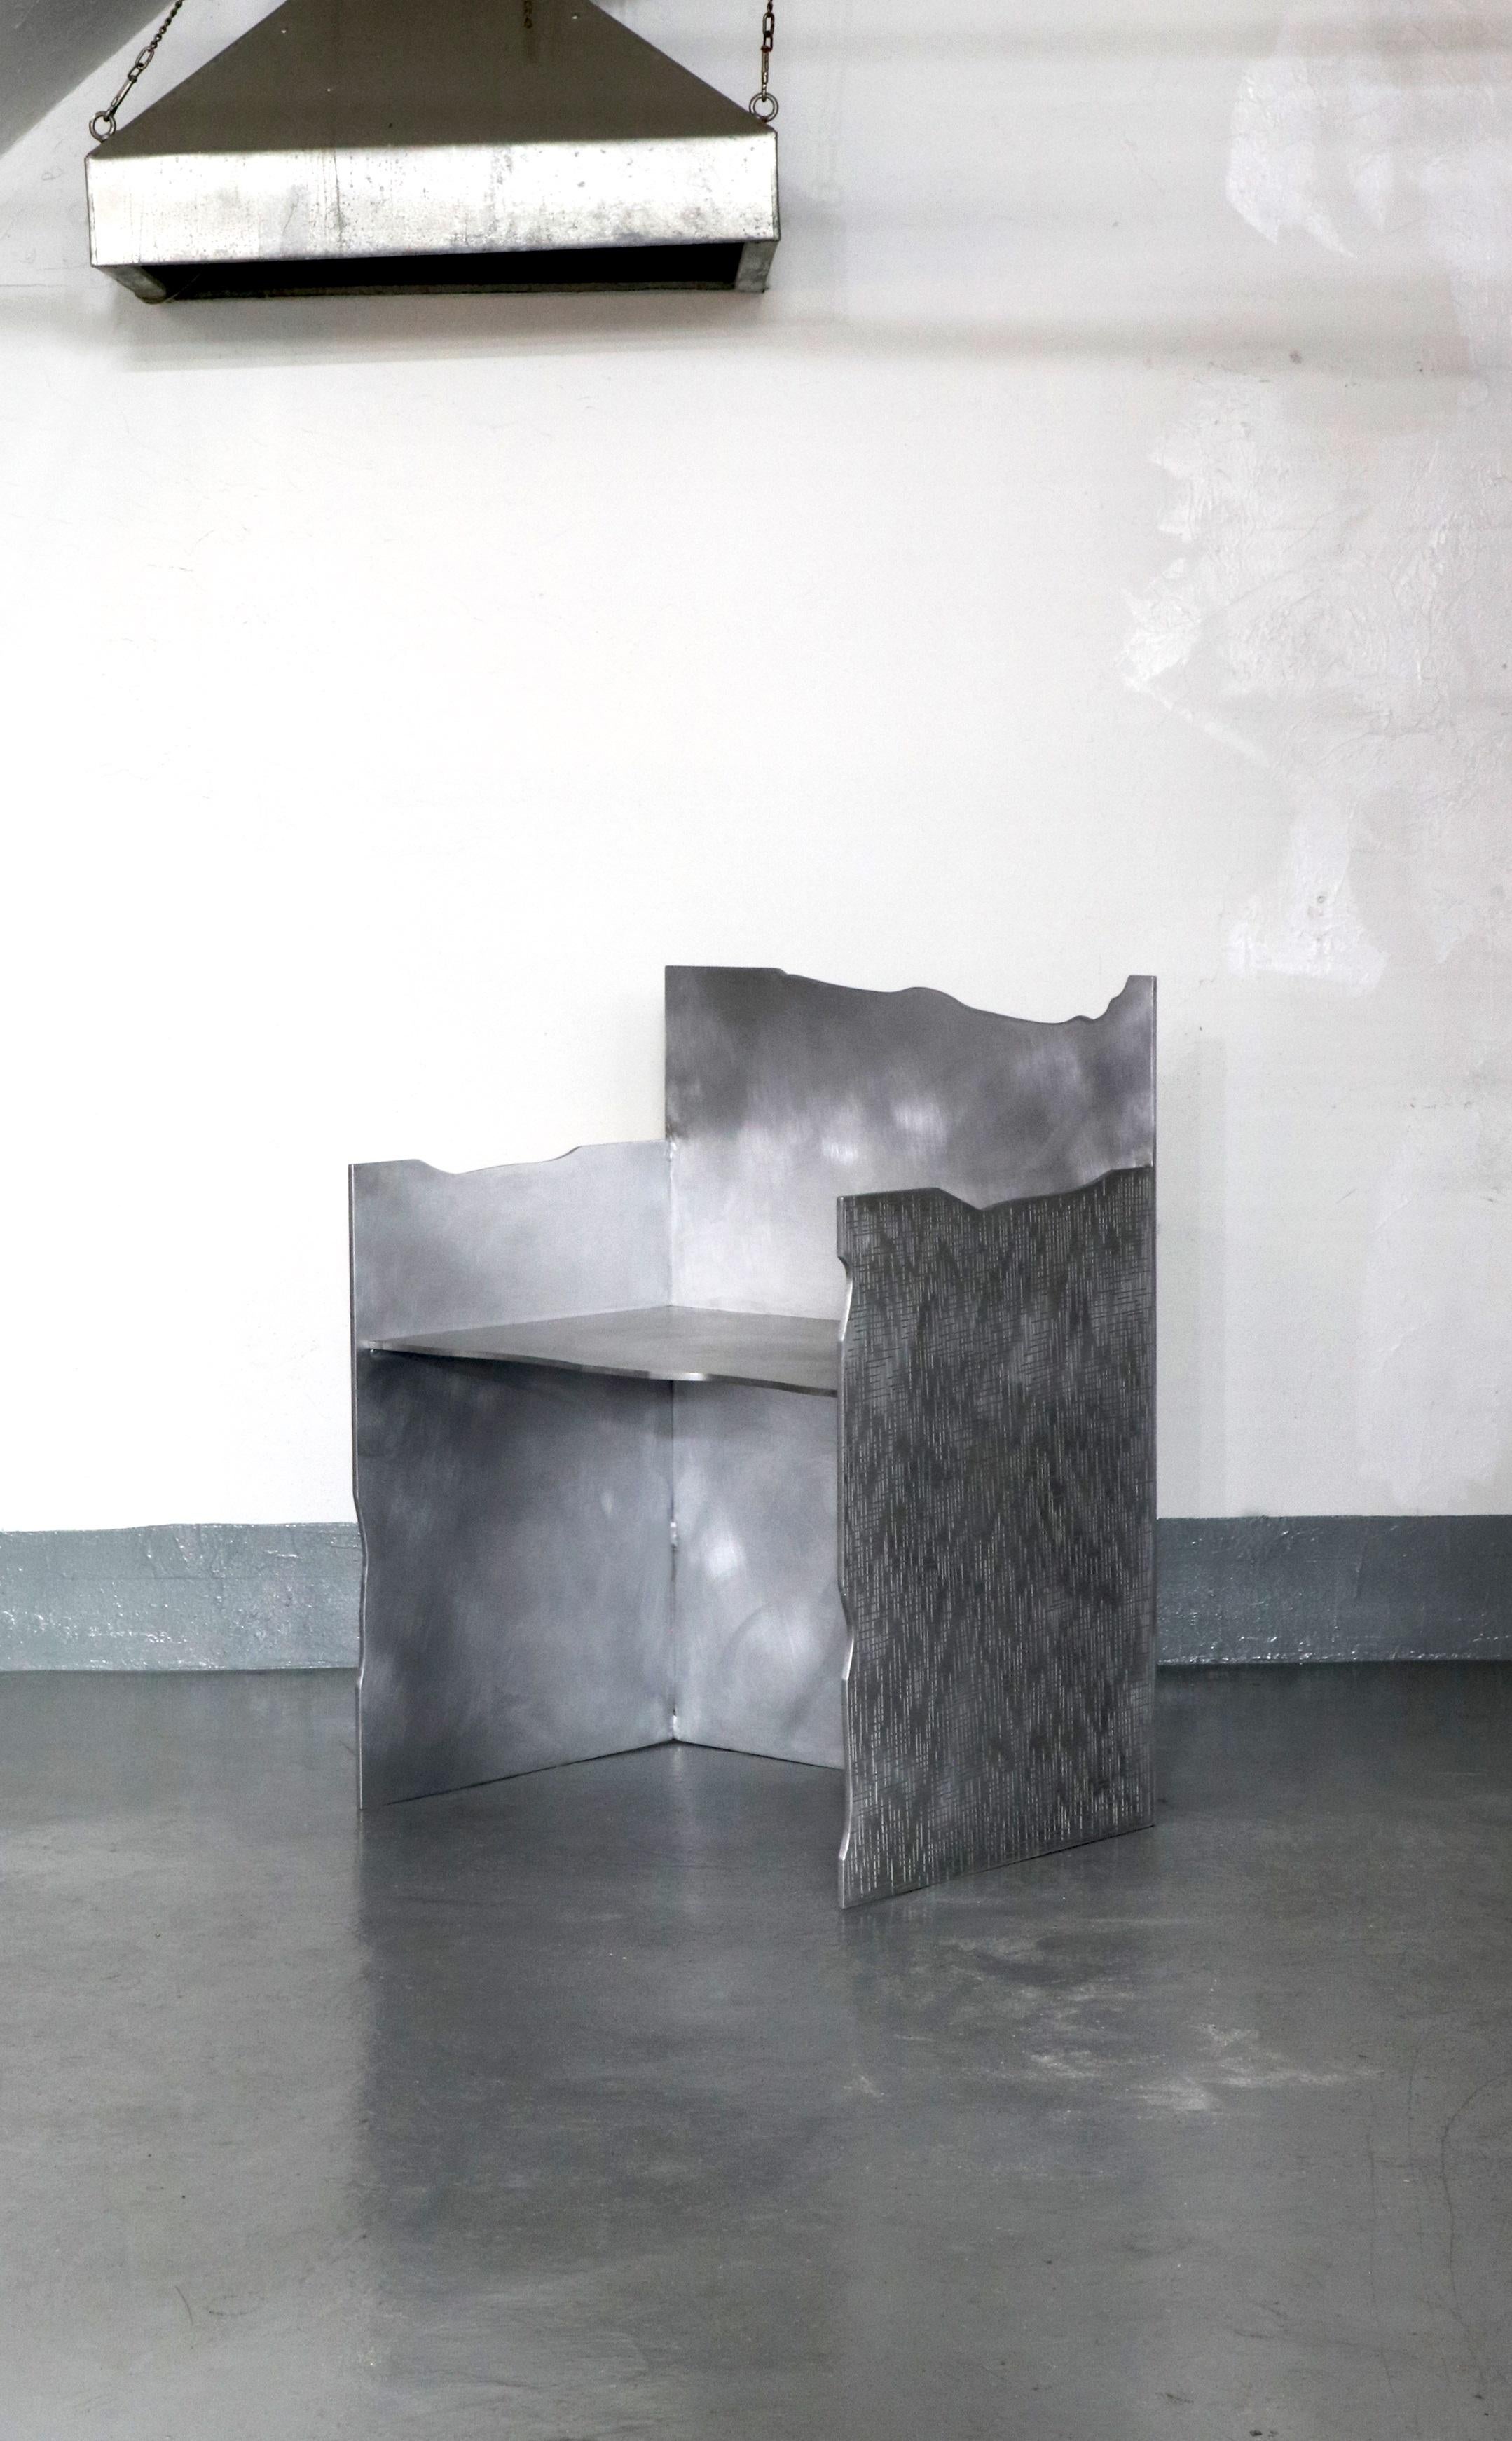 Cure 03 armchair by Sundo Yoon.
Dimensions: D50 x W70 x H90 cm.
Materials: Aluminum.

Cure Series - Sundo Yoon
'The Cure Series is a series of works by designer Sundo Yoon based in Korea.
 The Cure series feels that the low self-esteem and